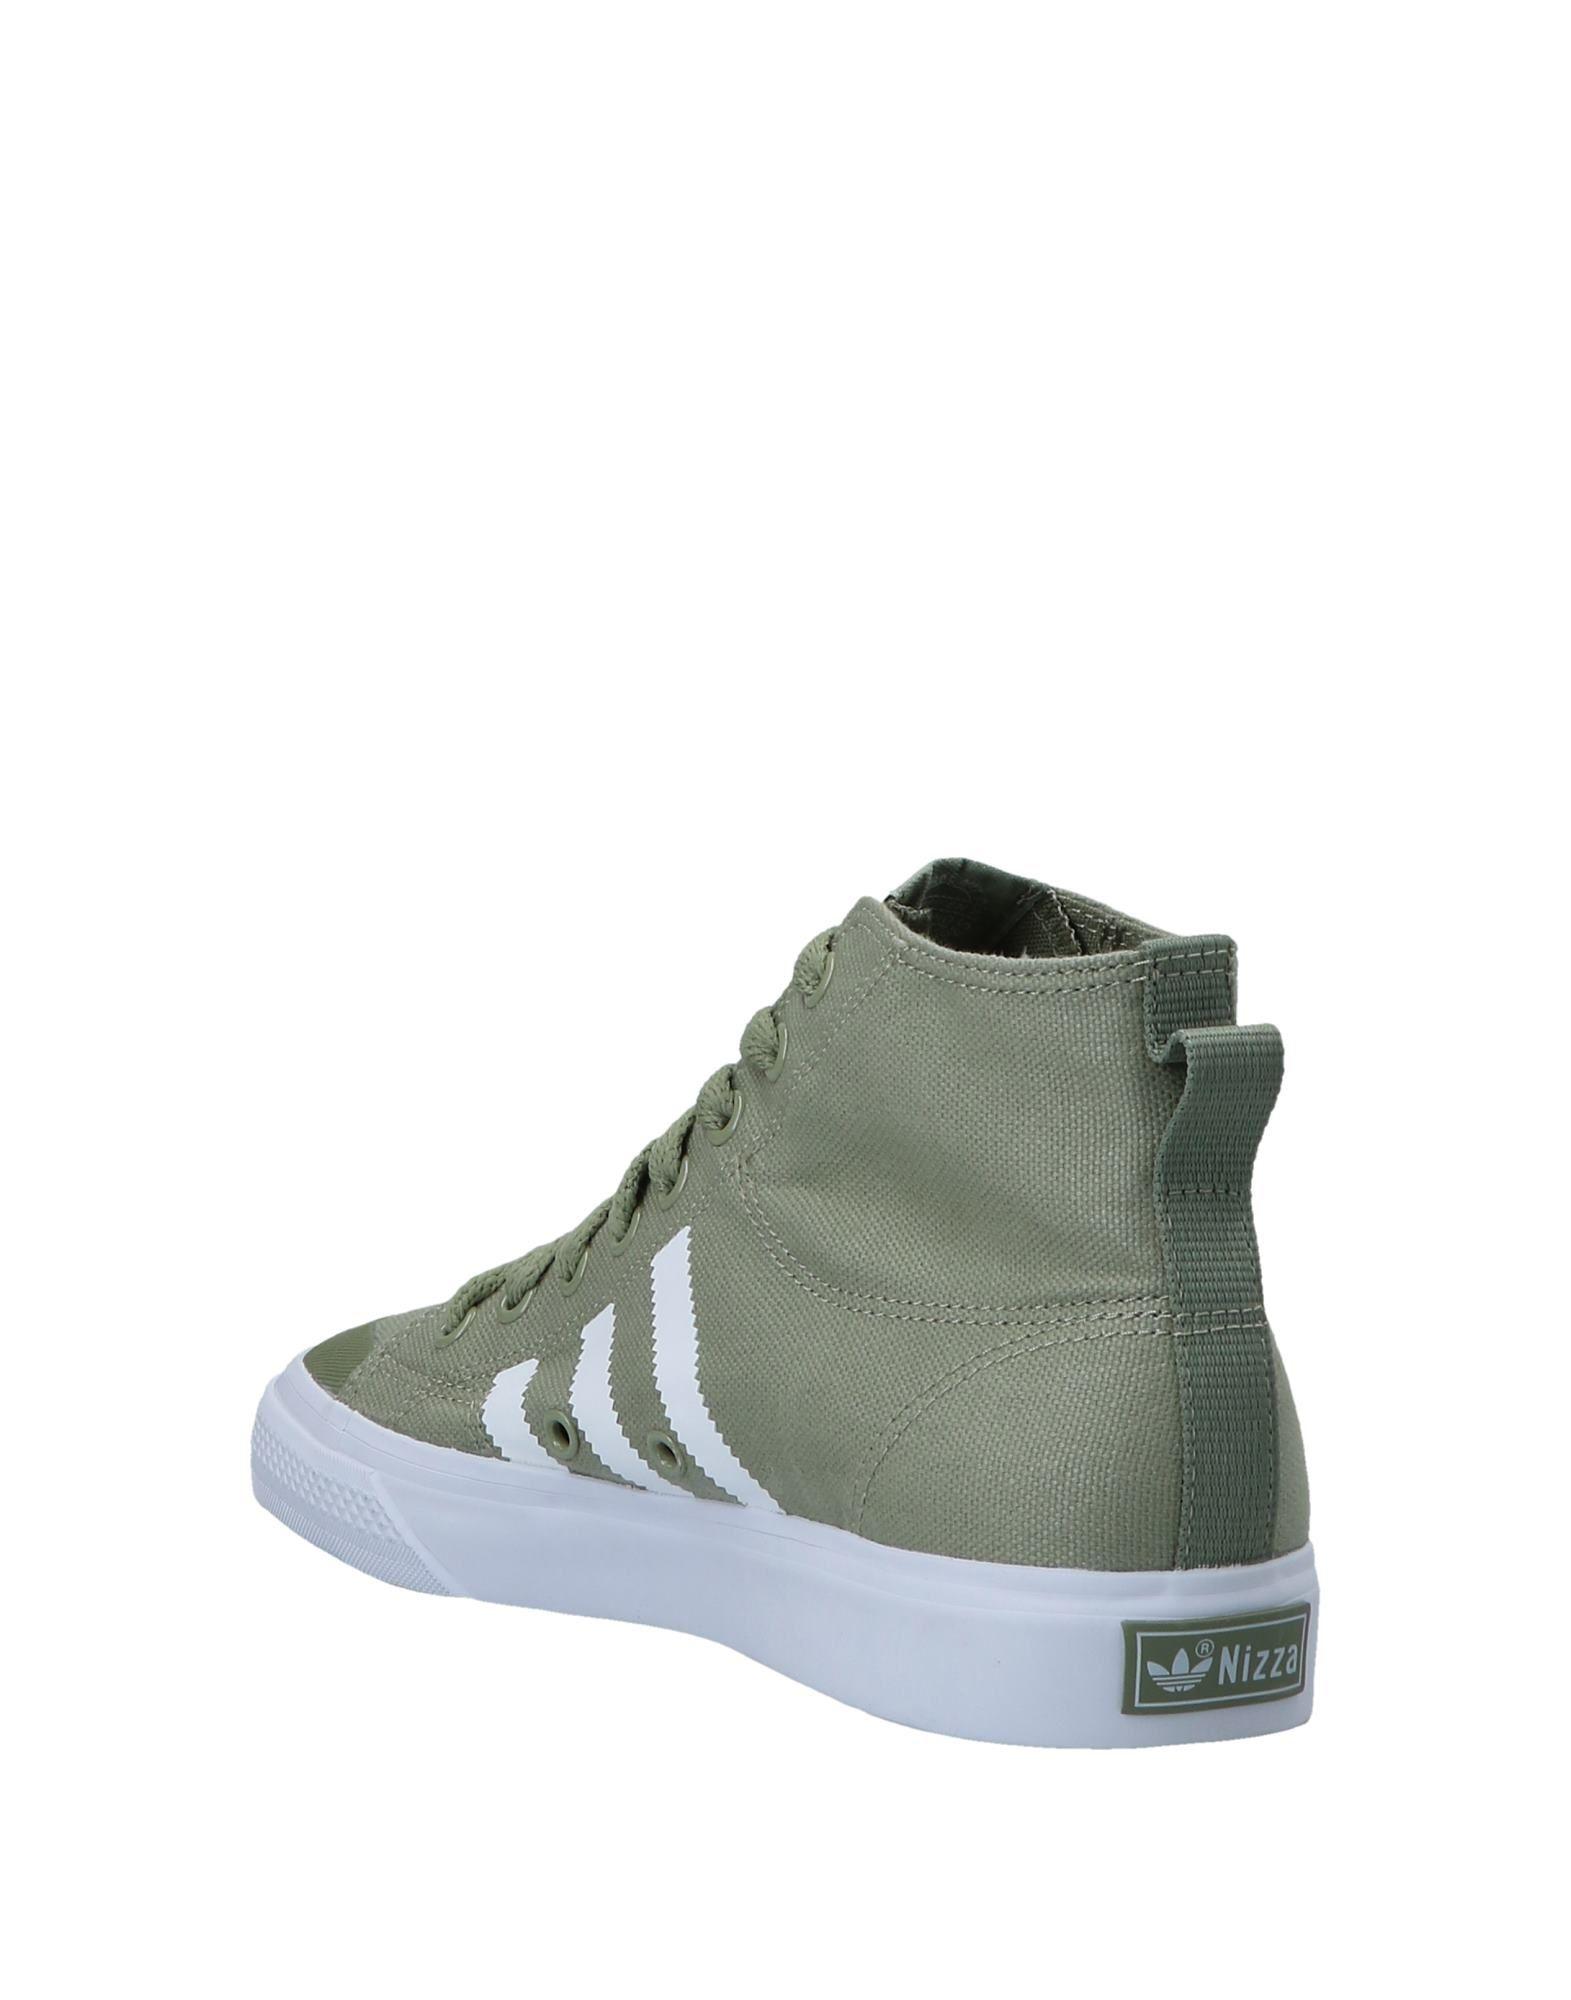 adidas Originals Canvas High-tops & Sneakers in Military Green (Green) for  Men | Lyst